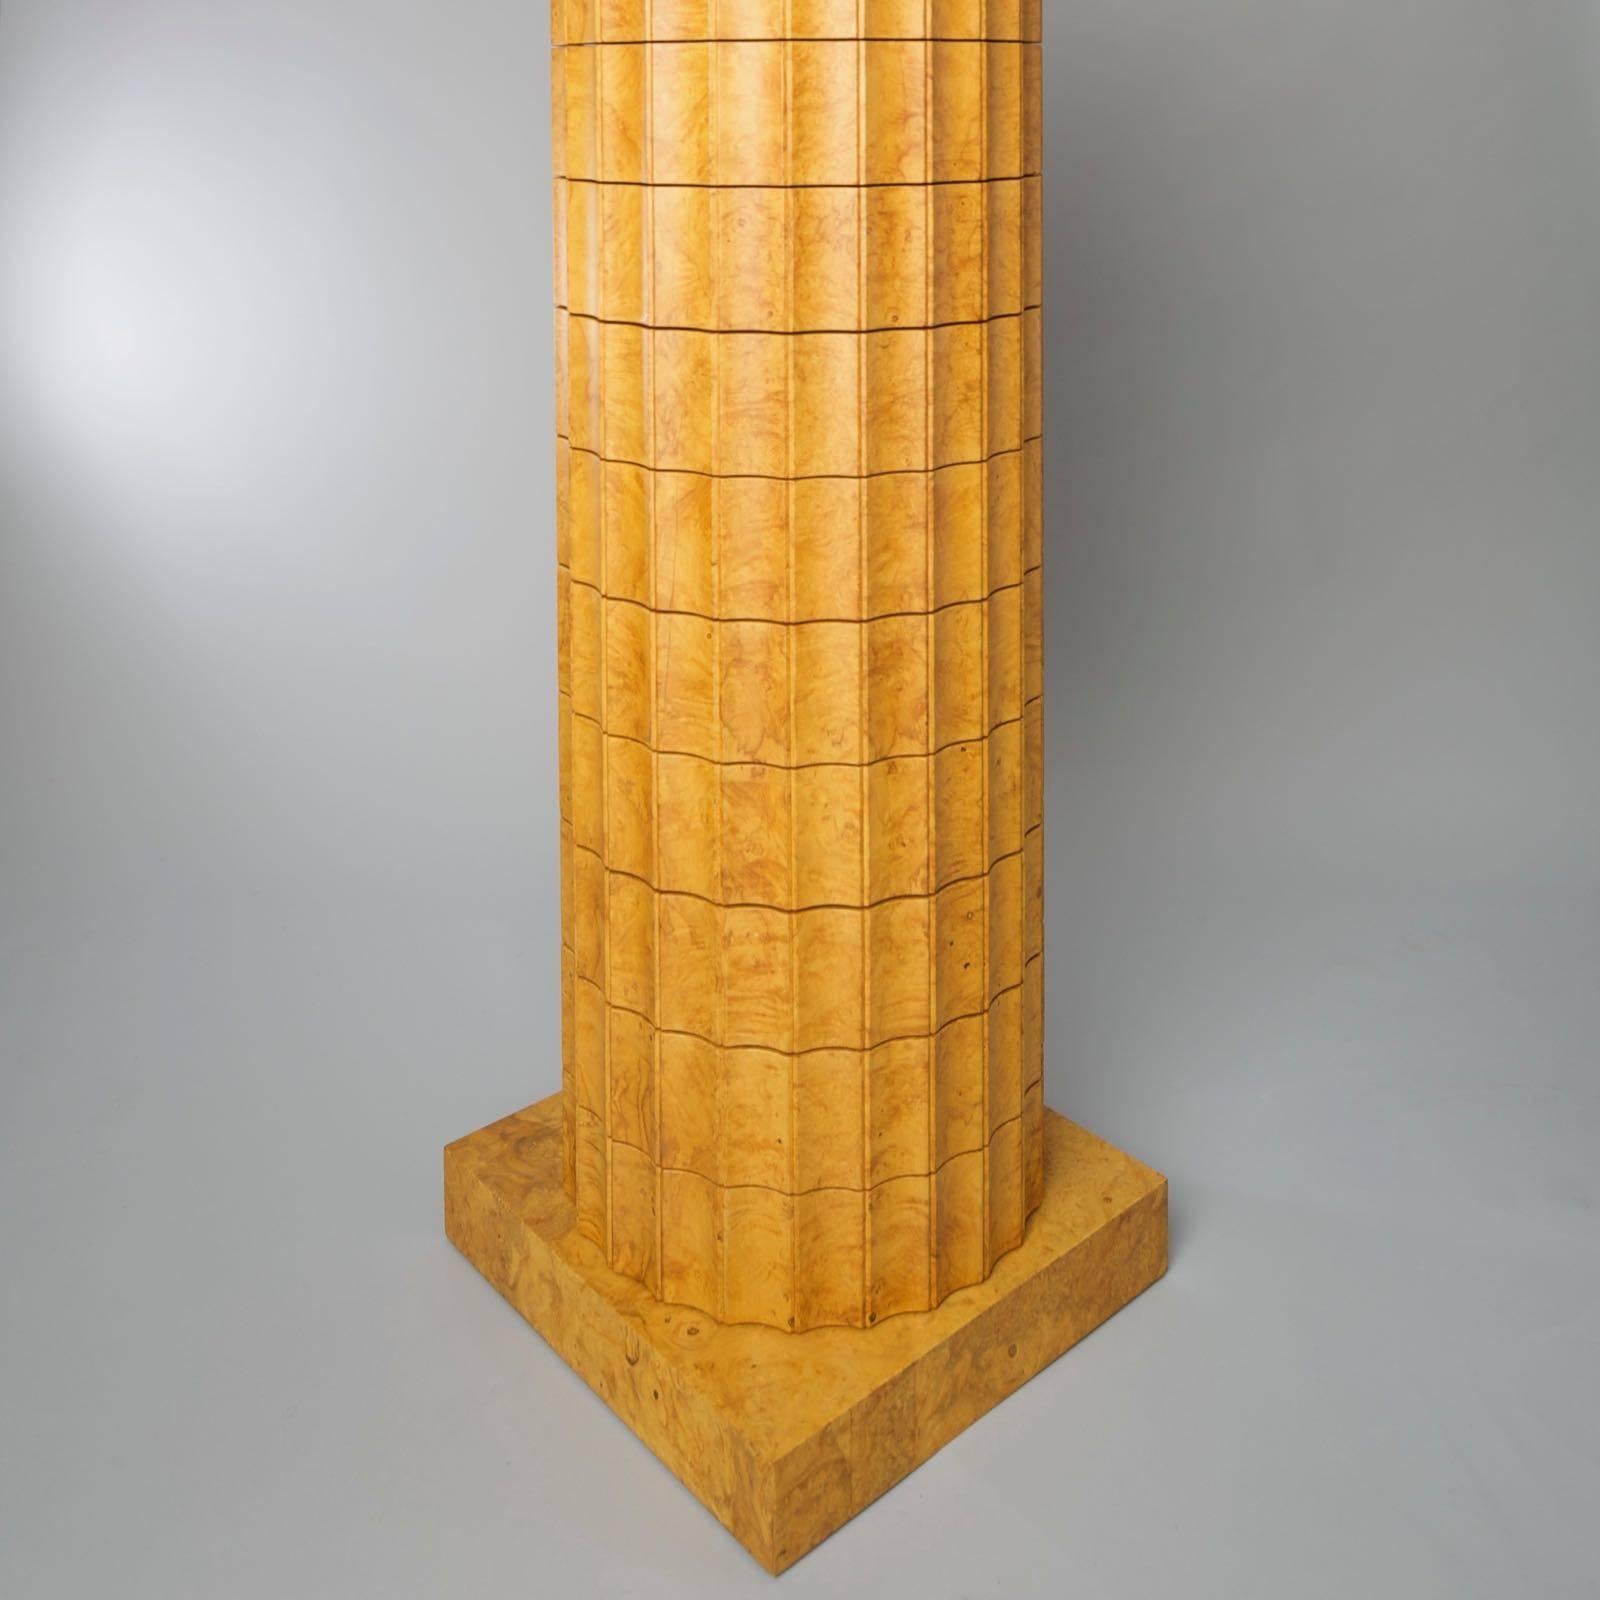 Fantastic and rare column with 11 compartments, ash tree, glass bottom for each compartment. This column was designed by the Swiss designers Trix & Robert Haussmann for the Röthlisberger collection in 1982. The compartments may be open separately,